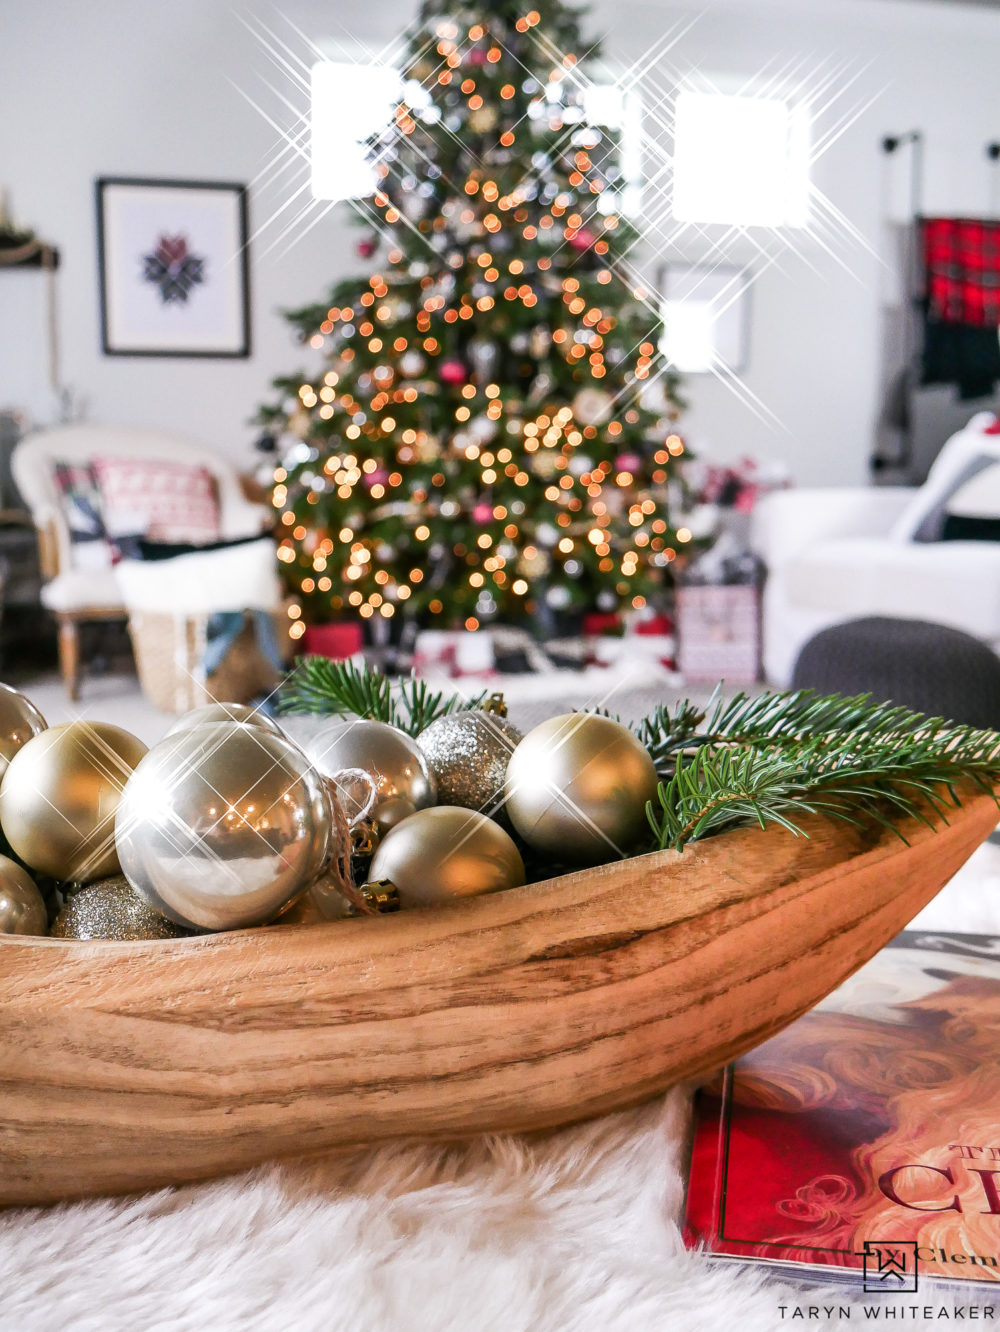 Come take this Christmas Home Tour featuring red, black and white with pops of greenery!